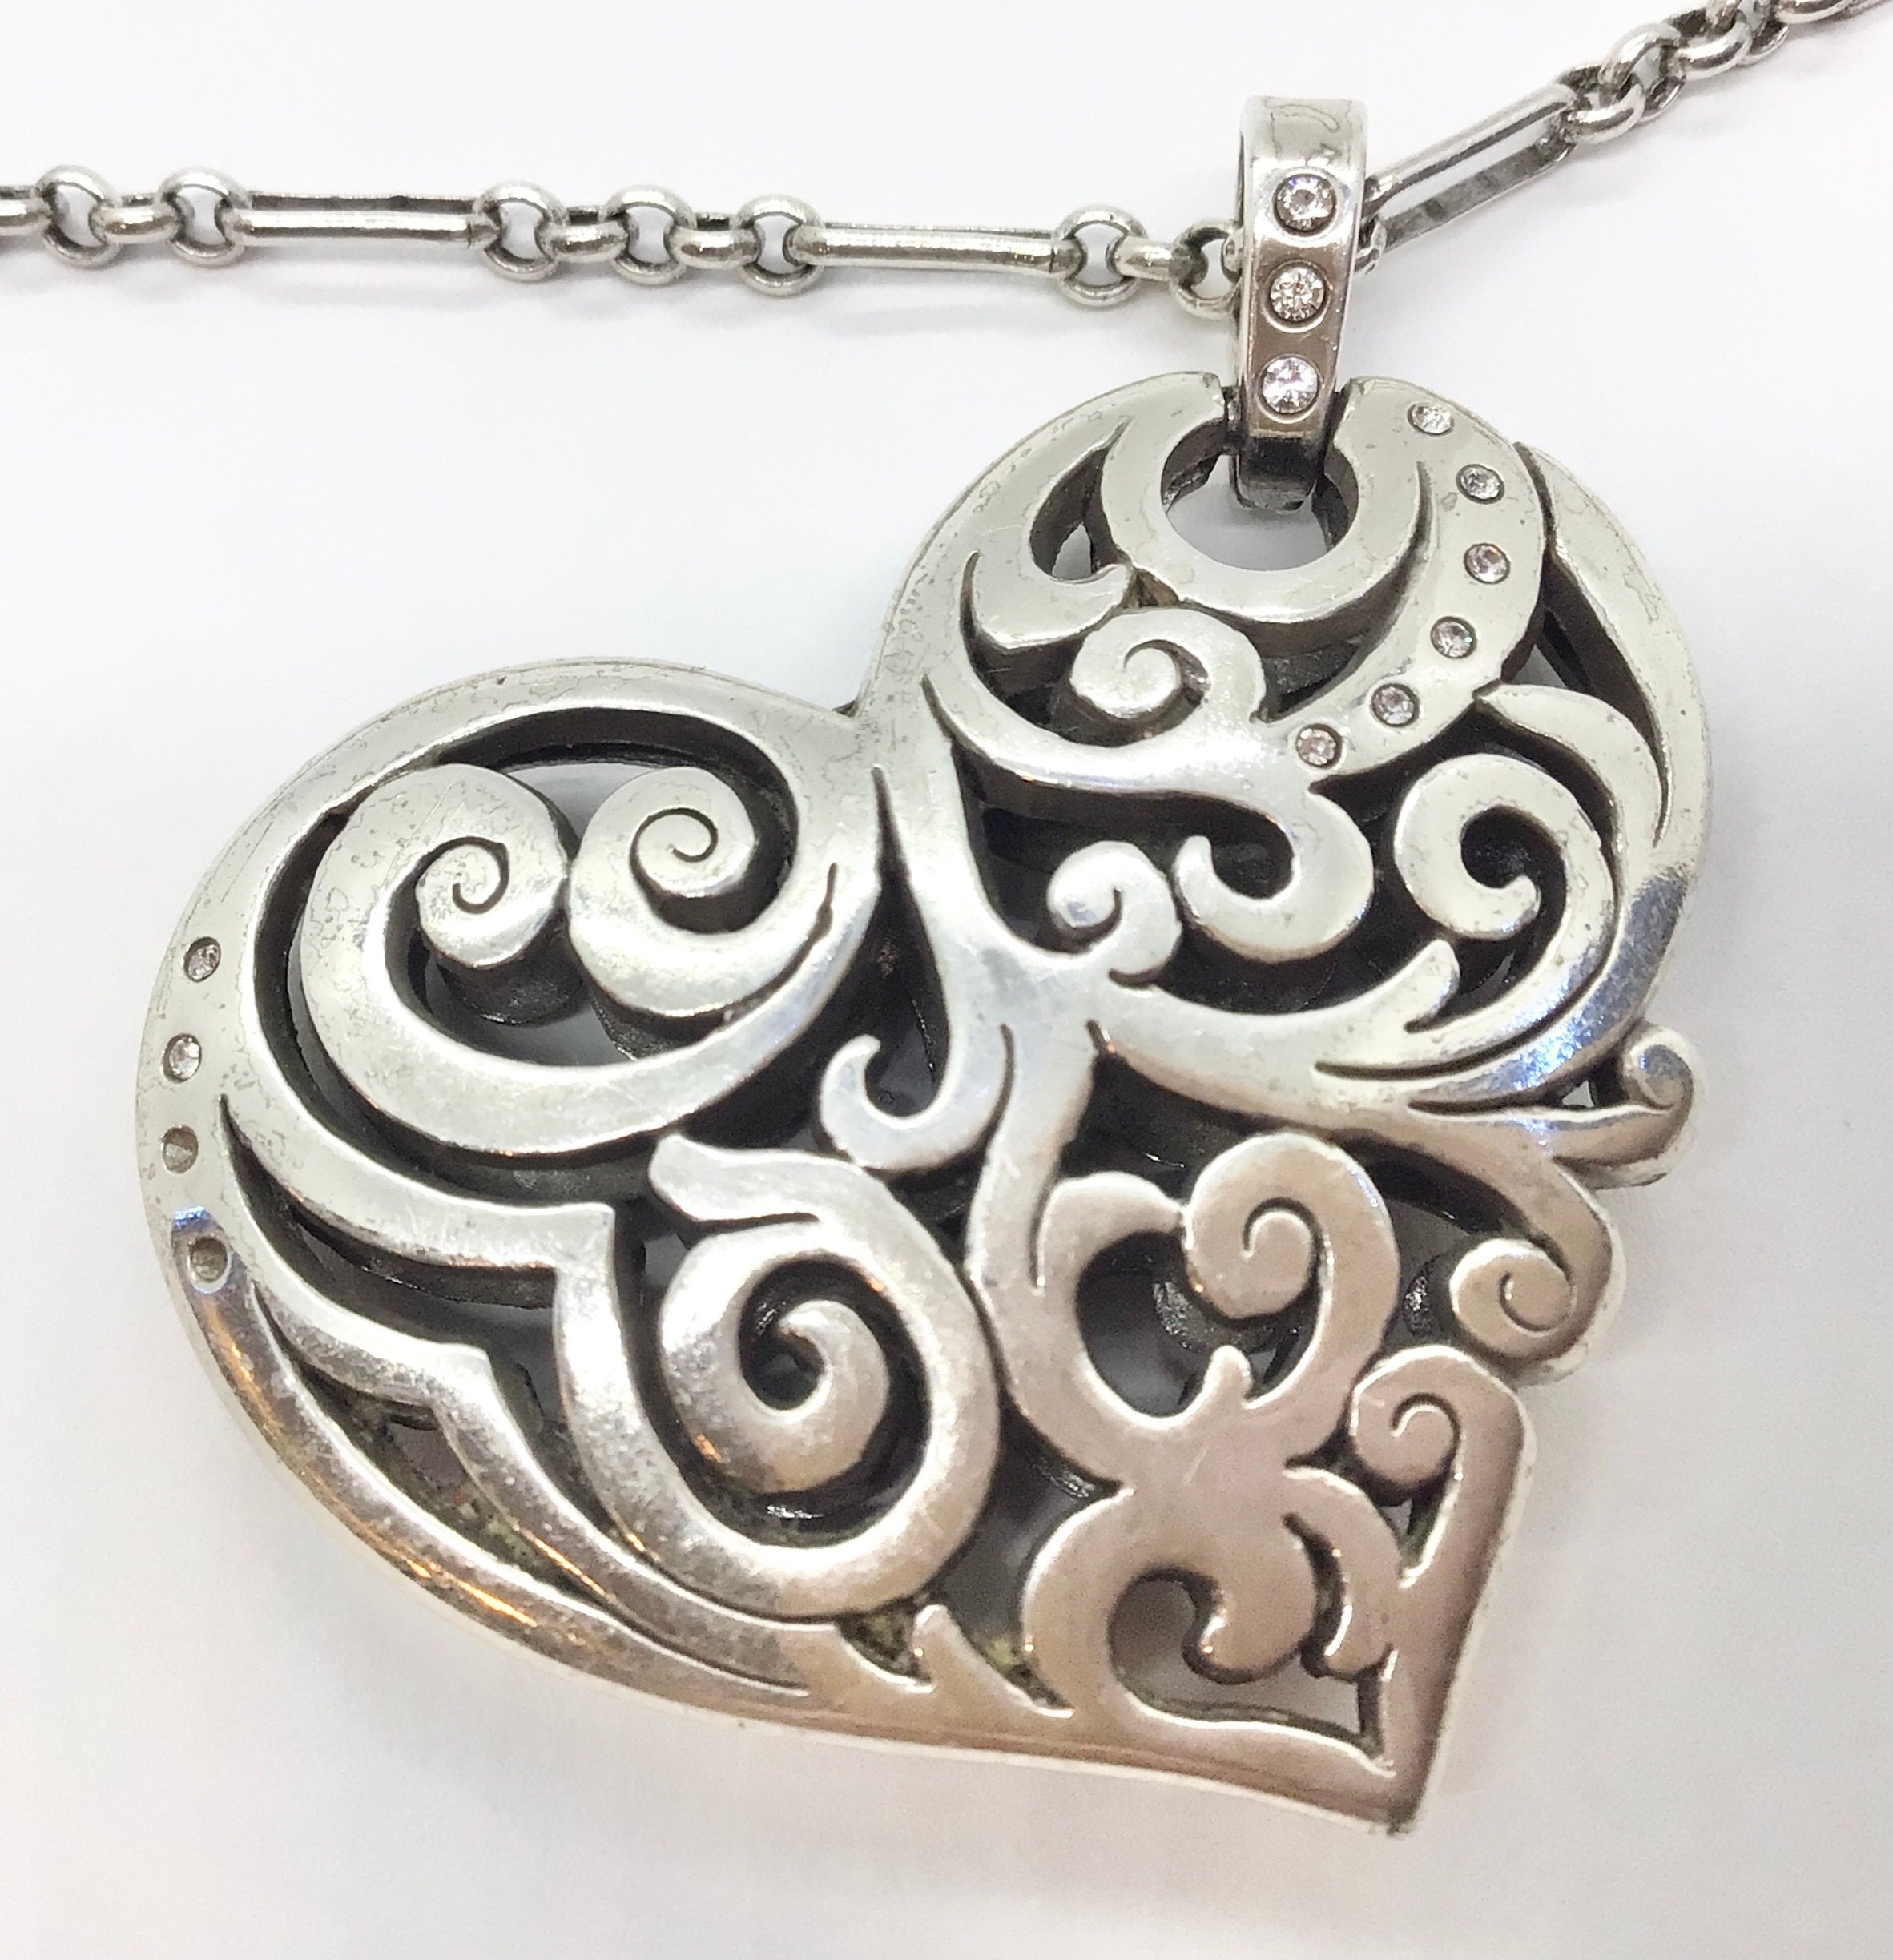 Illumina Heart Burst Necklace From the Illumina Collection By Brighton -  GREAT AMERICAN JEWELRY ONLINE